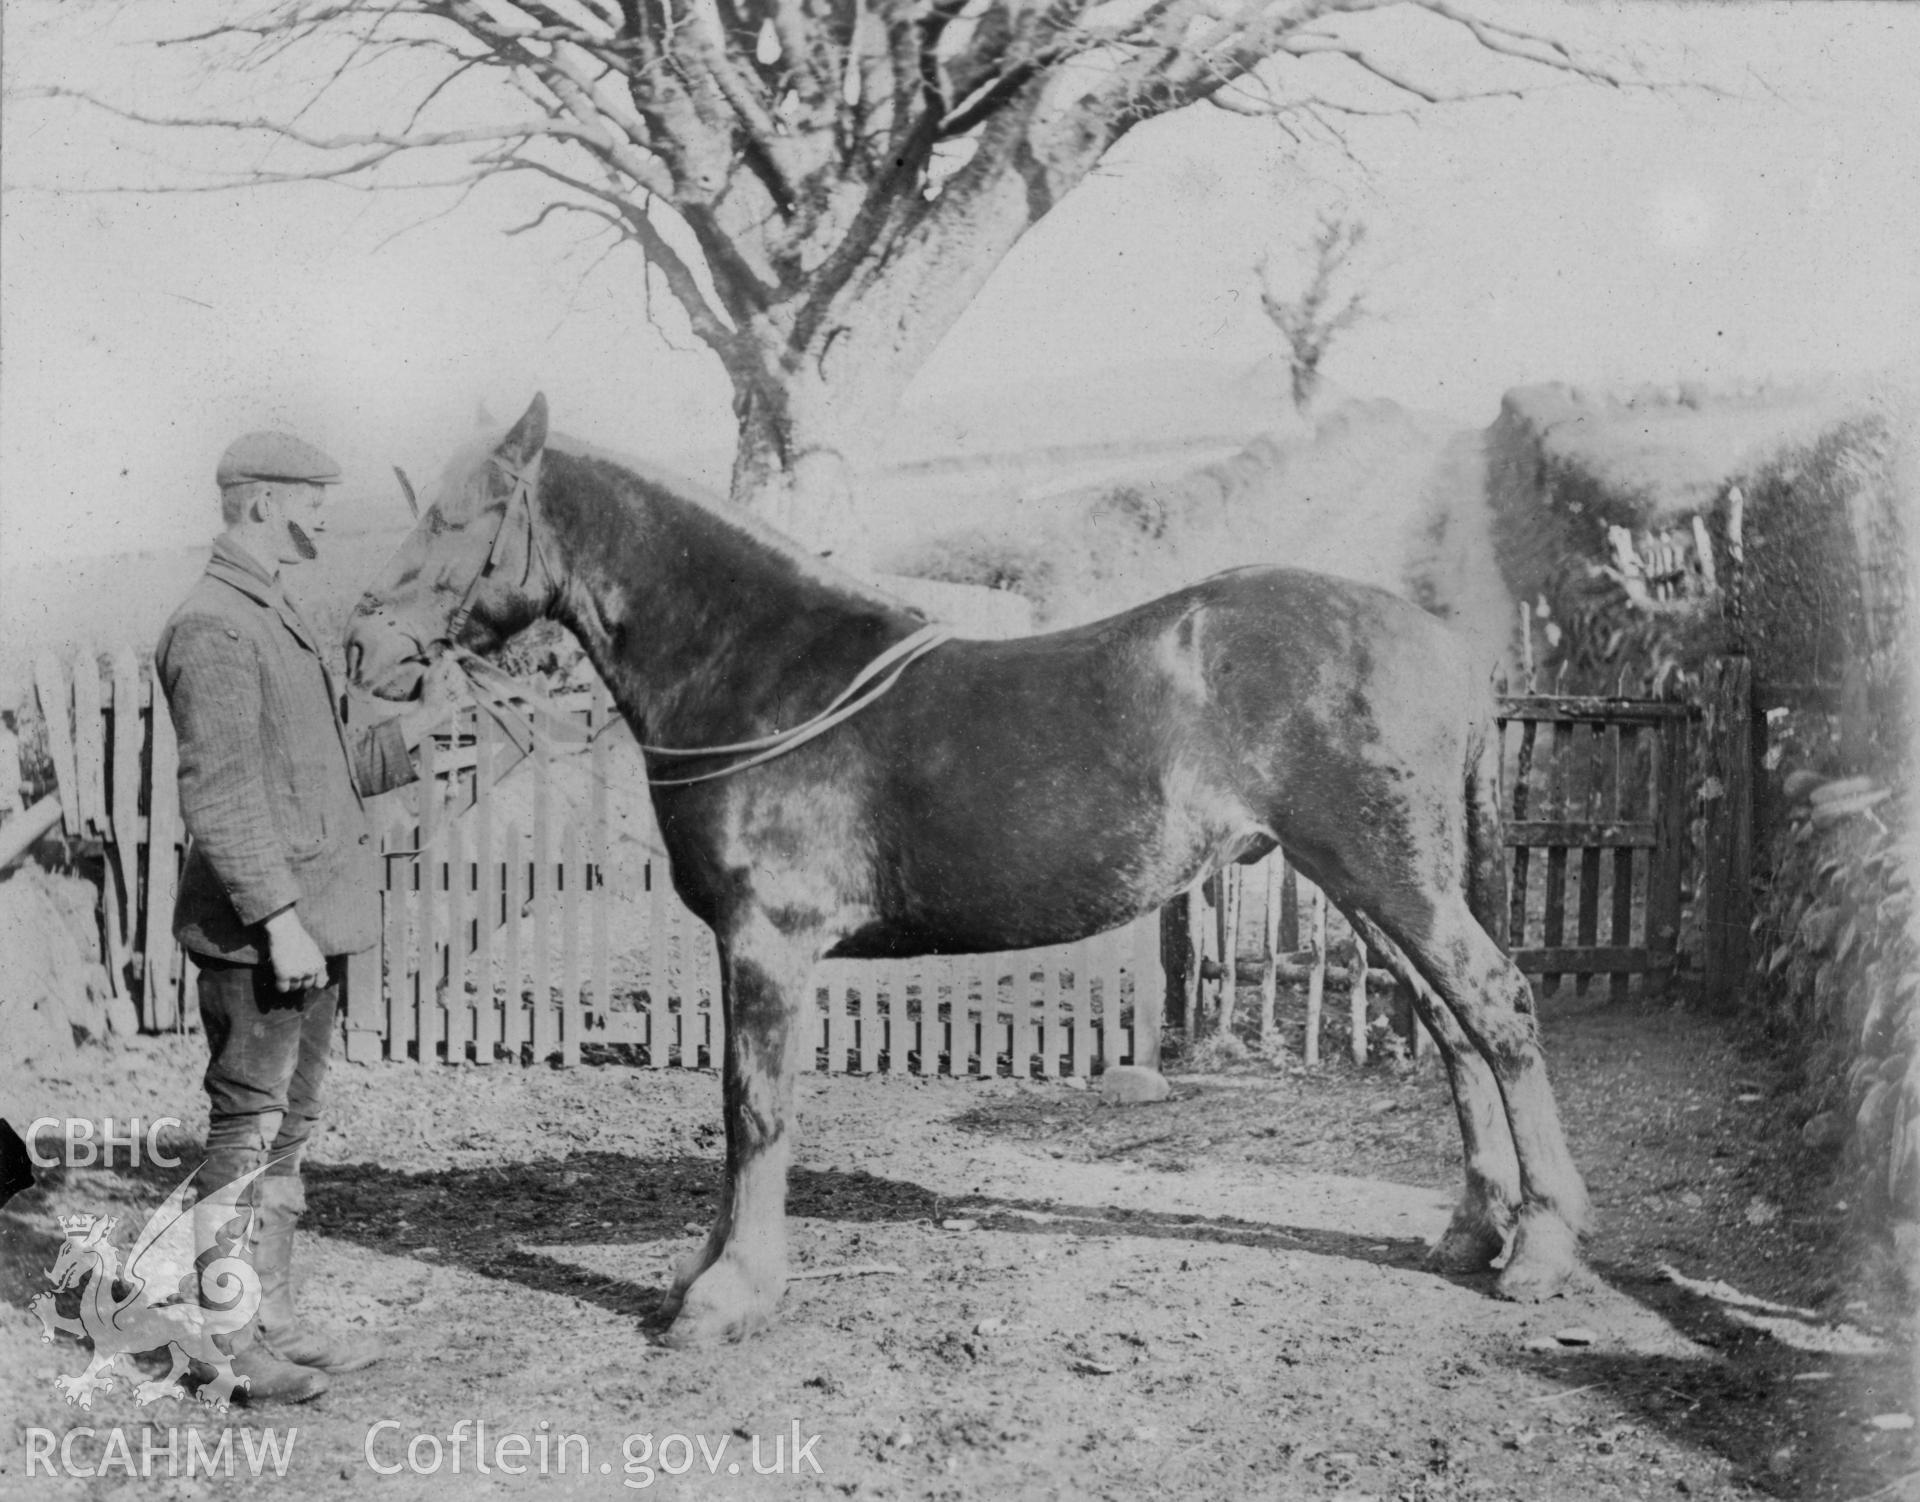 "Cardiganshire Prize Pony, 1910".  Digitised from a photograph album showing views of Aberystwyth and District, produced by David John Saer, school teacher of Aberystwyth. Loaned for copying by Dr Alan Chamberlain.